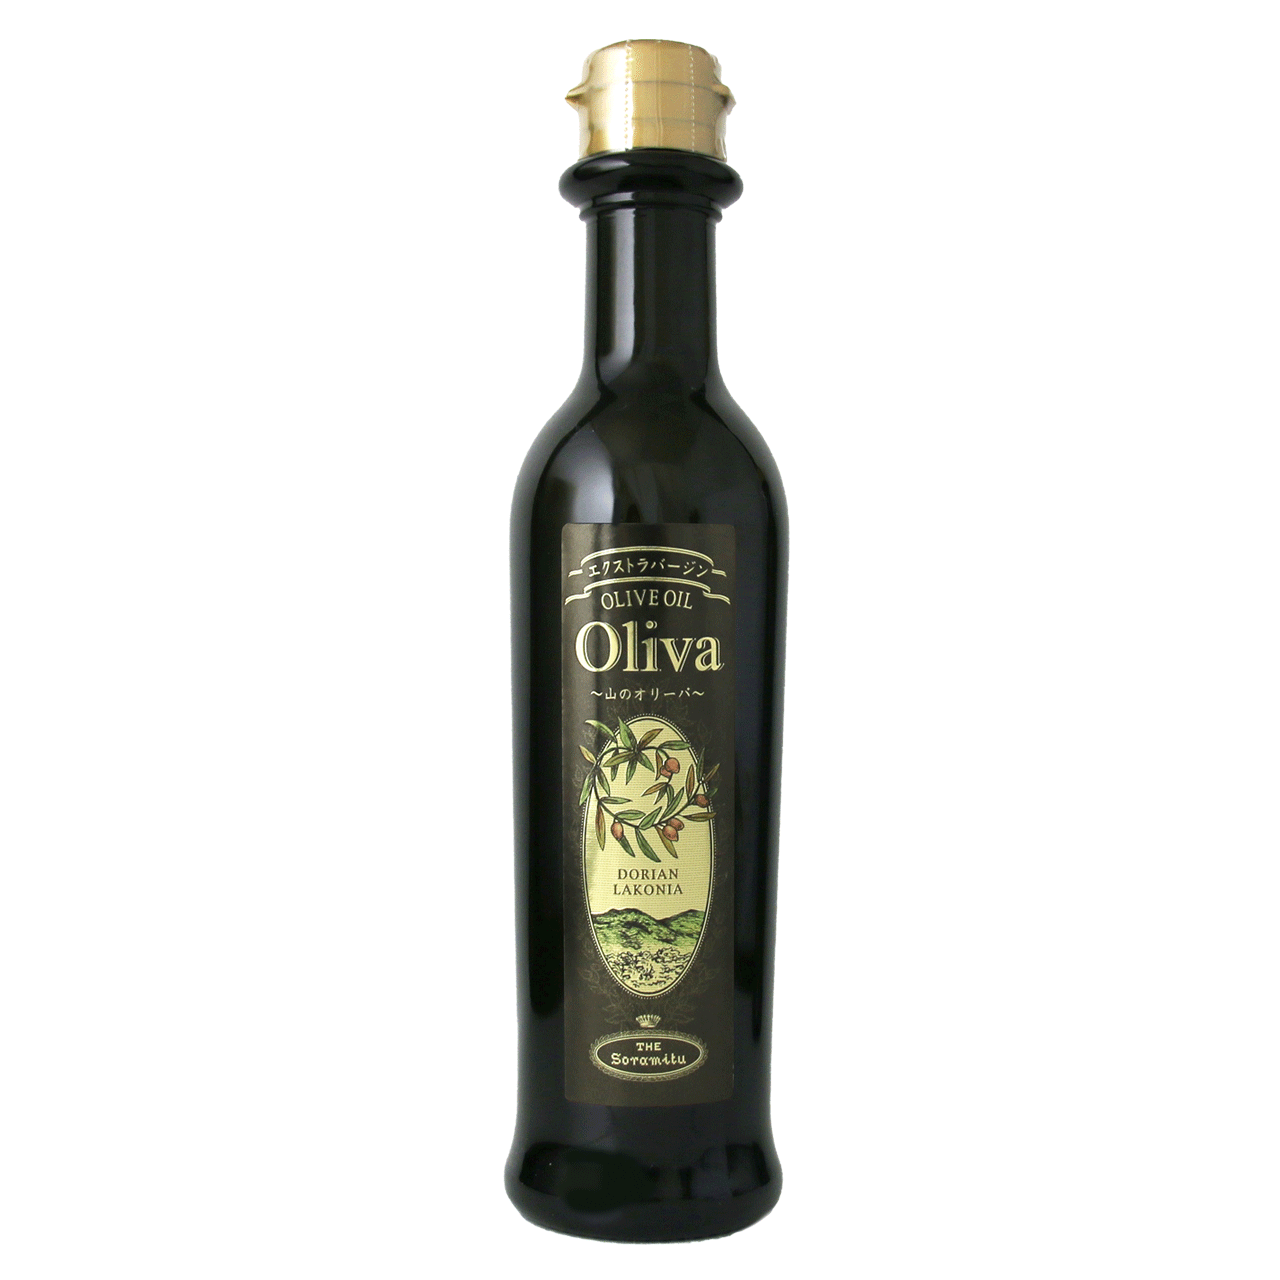 Extra Virgin Olive Oil - EX Mountain Oliva - Fruity sweetness and Rich and Elegant flavor 250ml